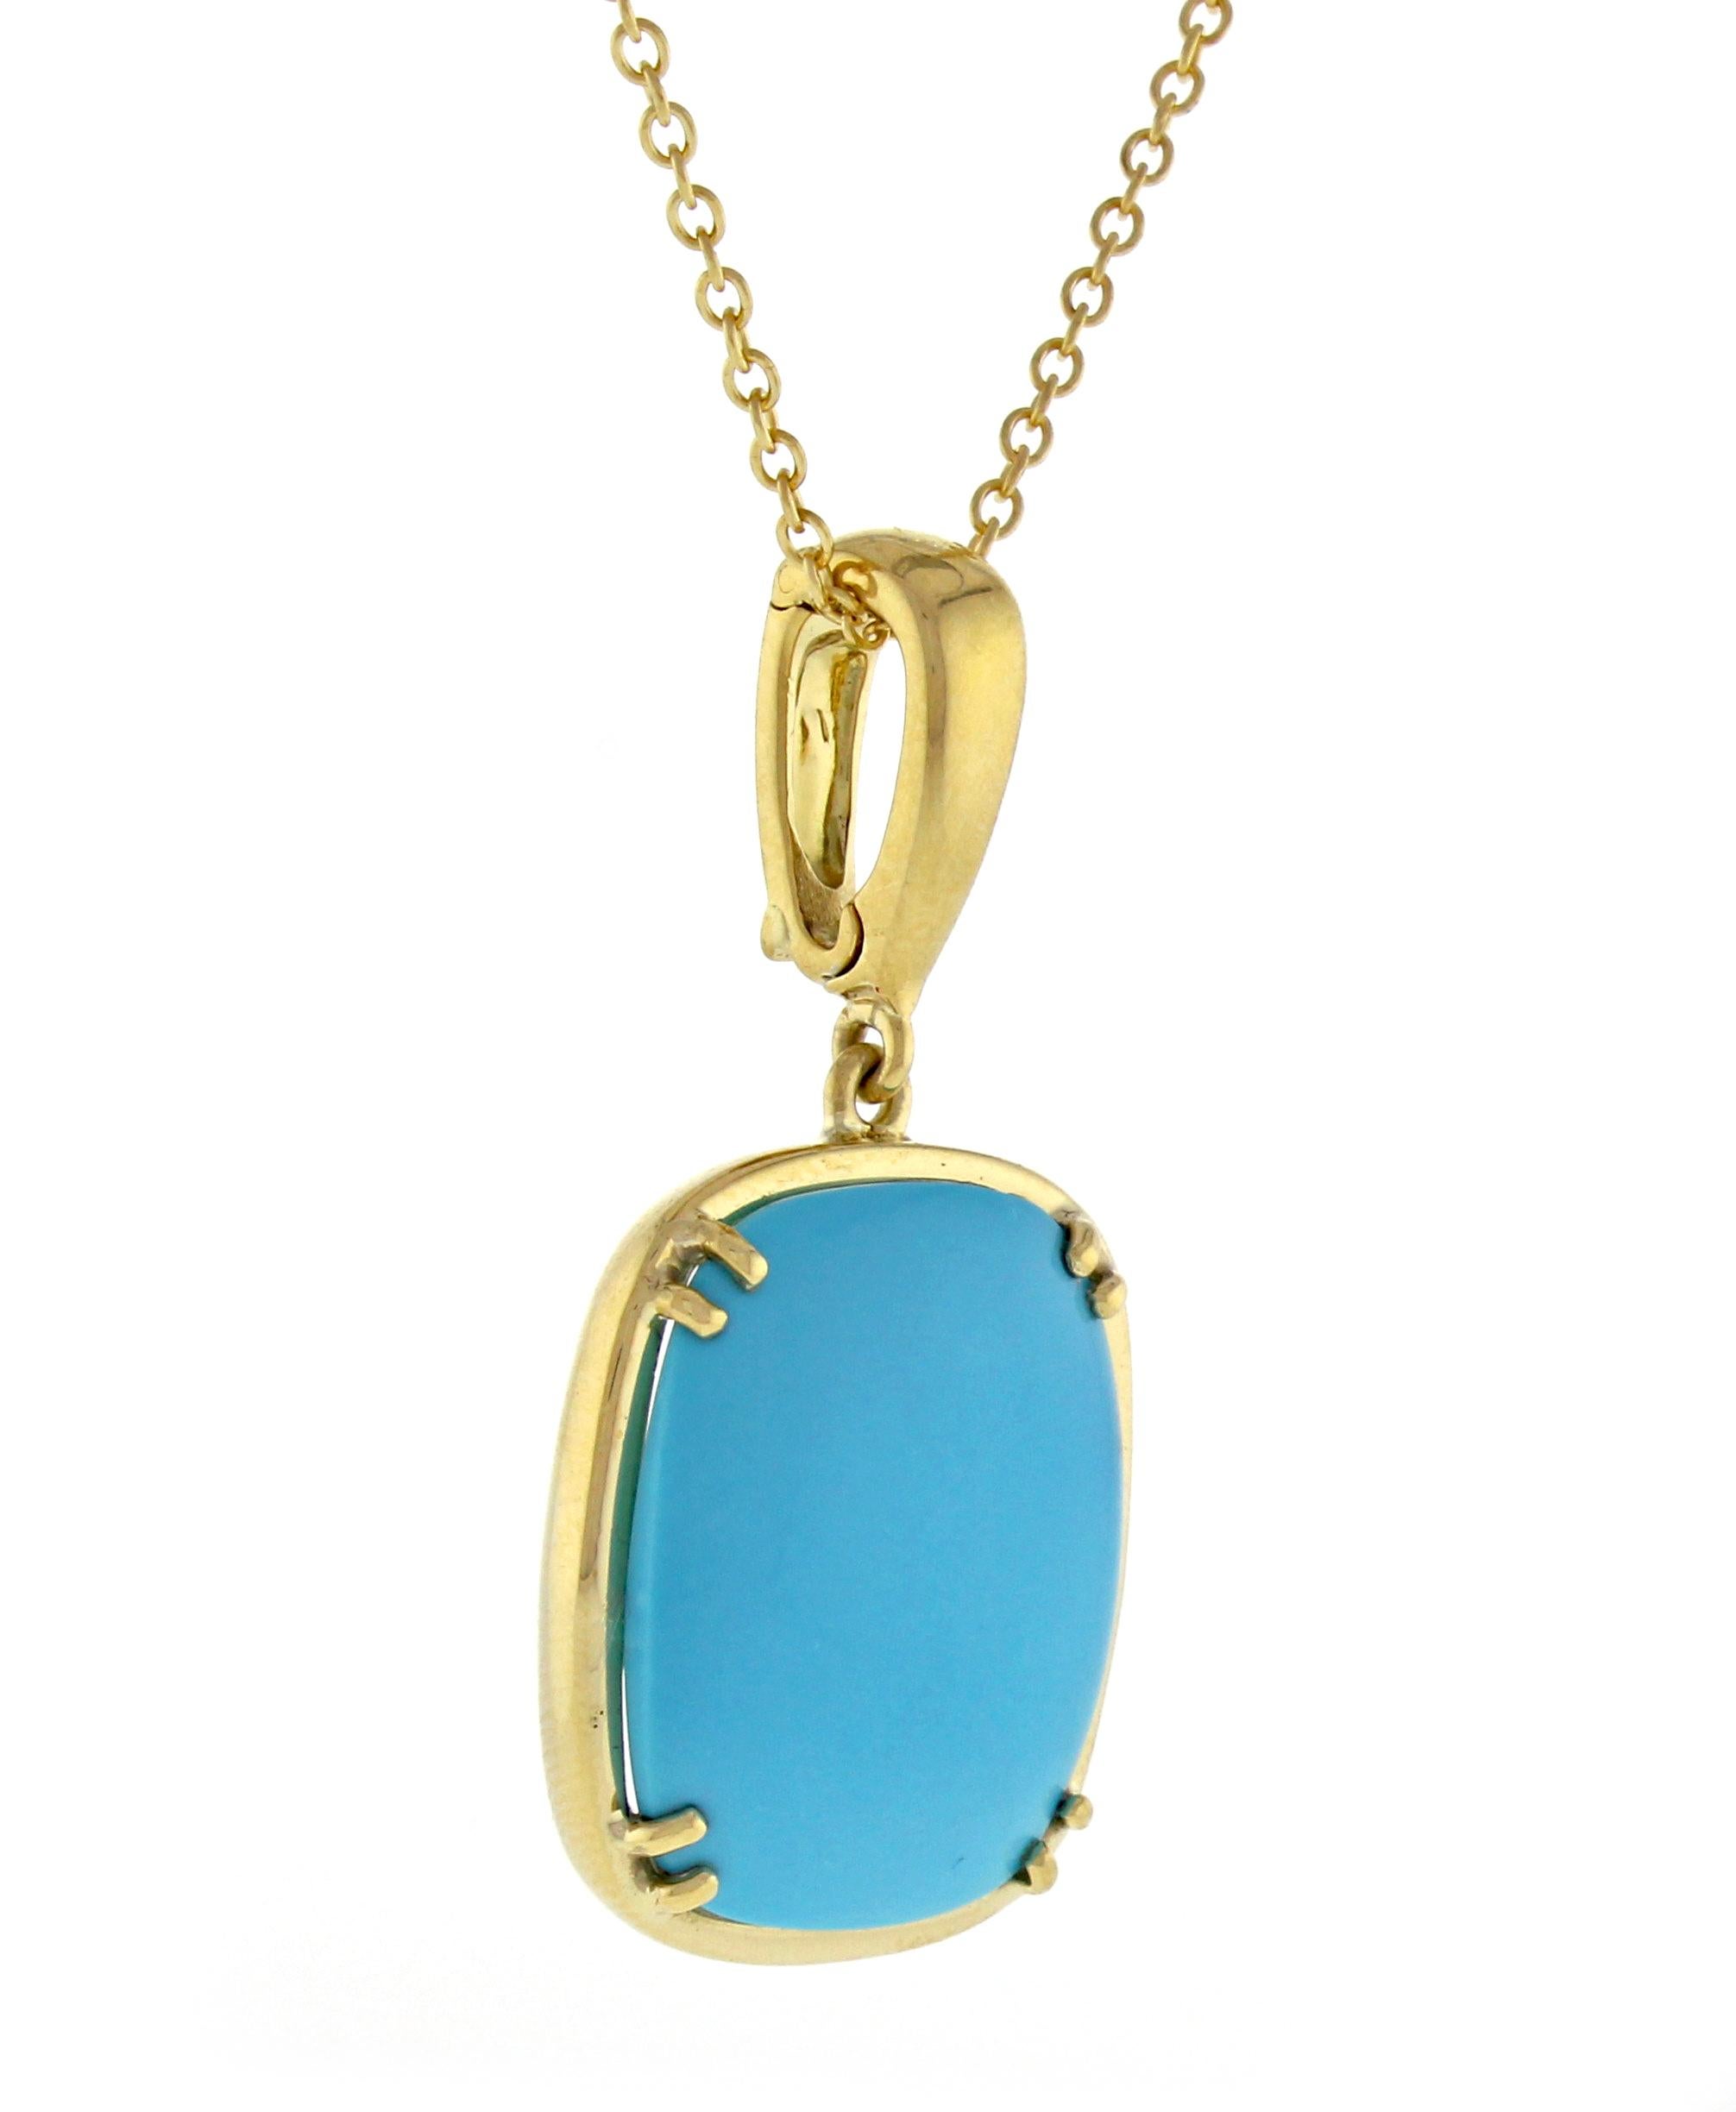 From David Webb, a cushion shaped  turquoise pendant. The Persian cabochon Turquoise measures 22mm X 18mm and is set in an 18 karat frame. The snap bail opens to accommodate up to a 3.5mm chain or chord. The 16 inch  18 karat necklace is from